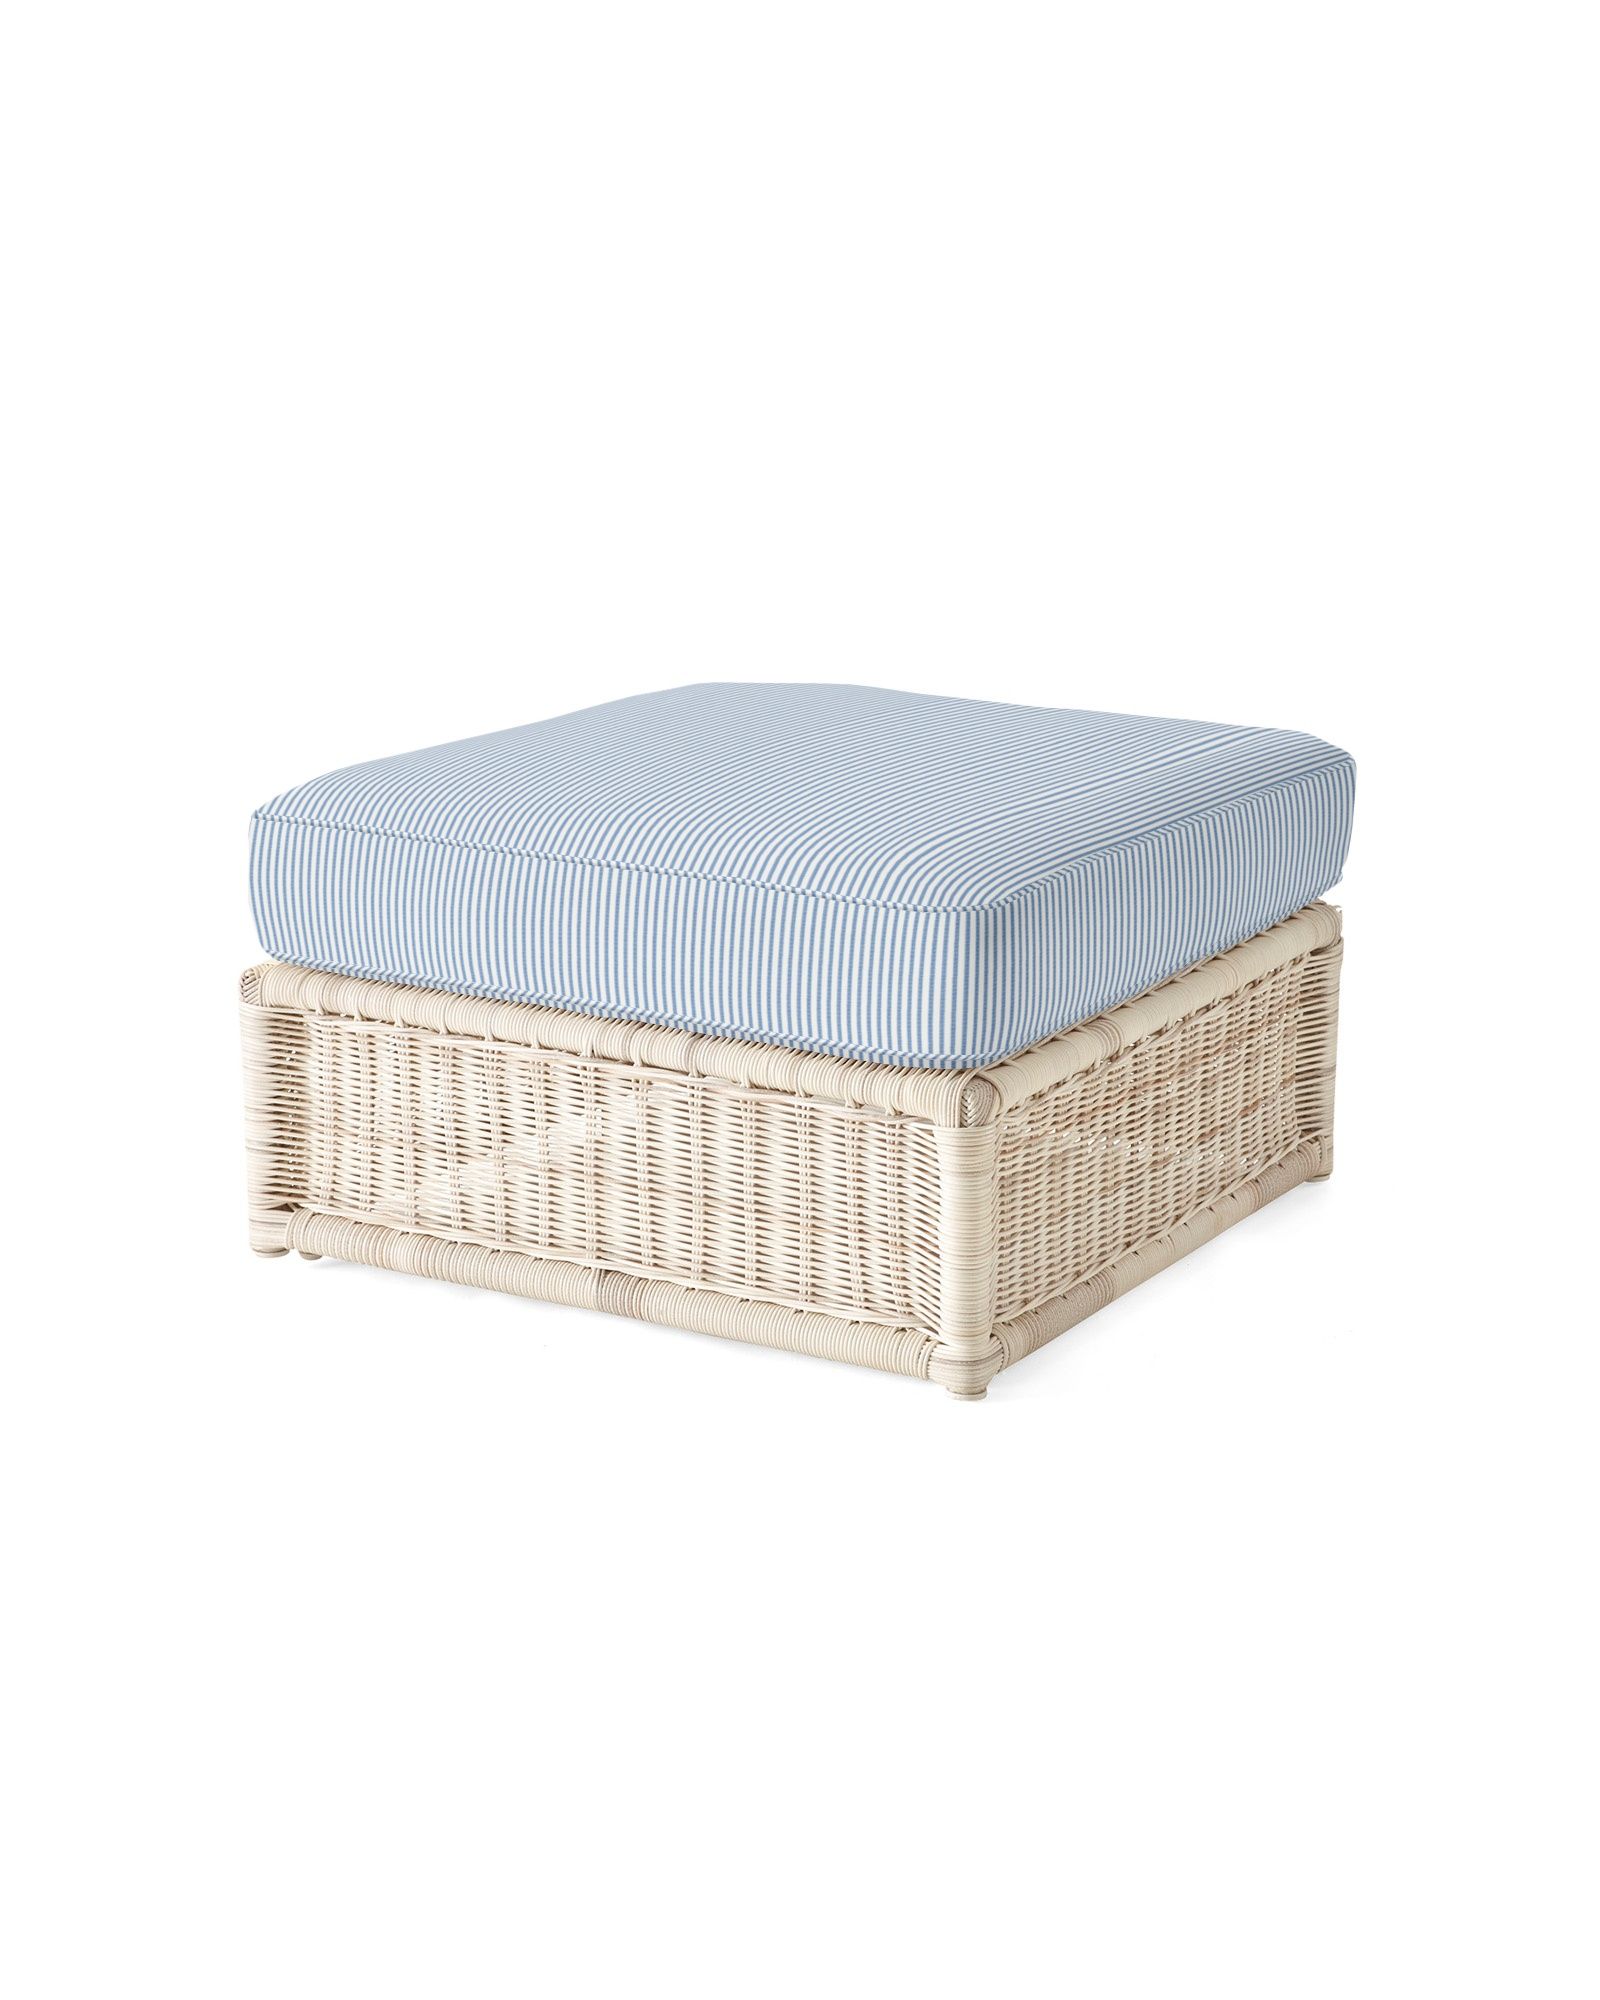 Pacifica Ottoman - Driftwood | Serena and Lily